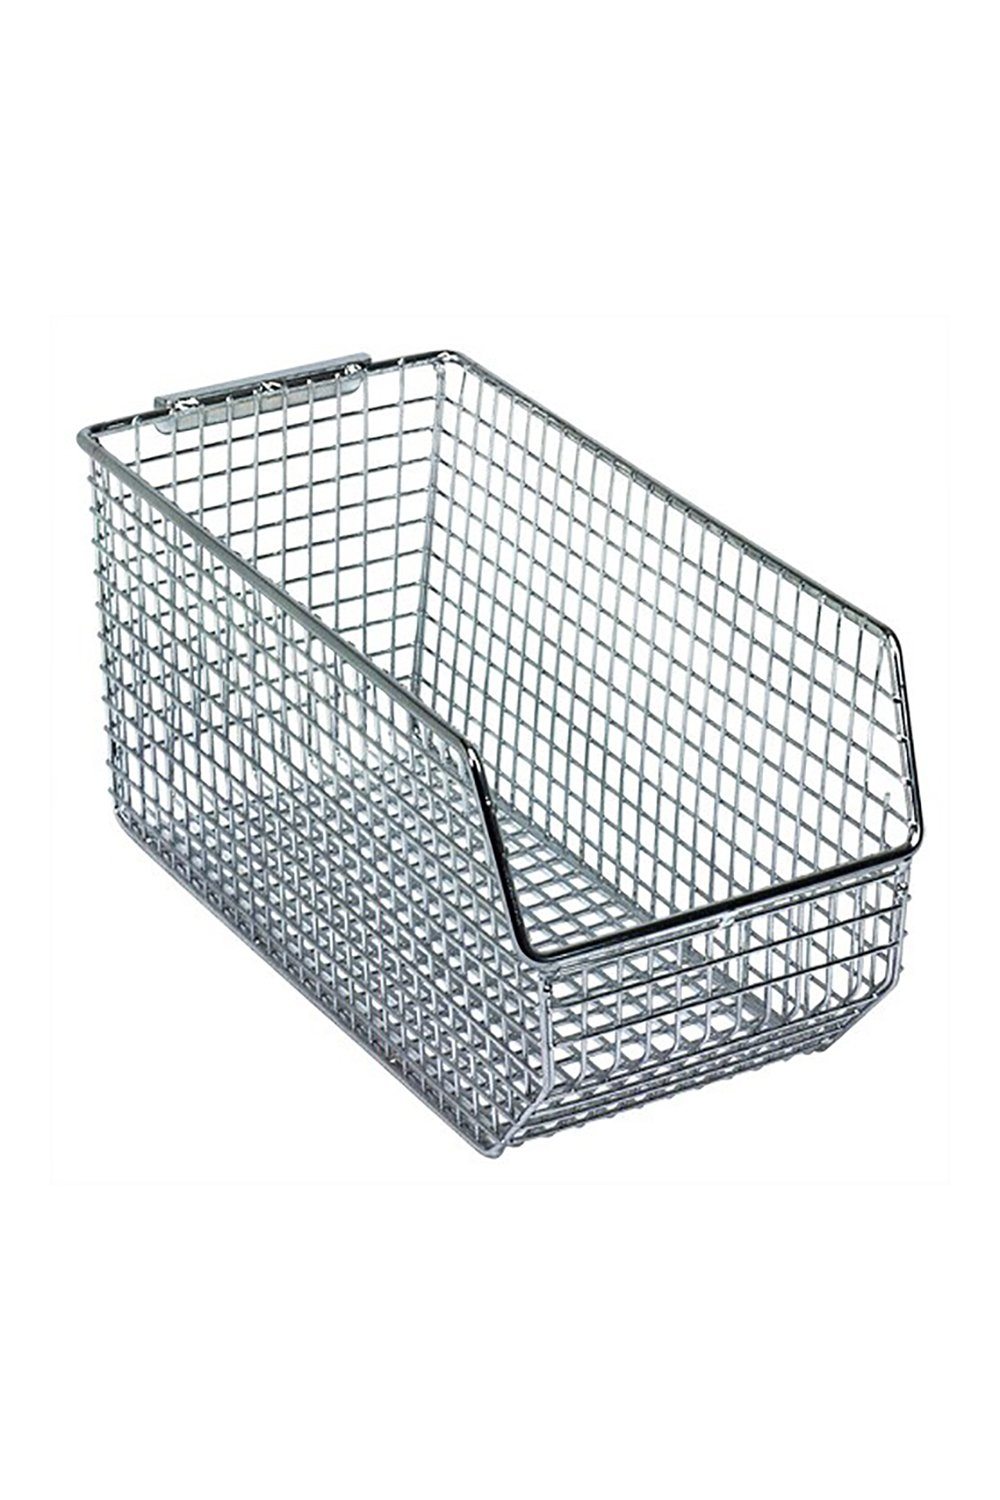 Mesh Stack and Hang Bin Bins & Containers Acart 10-3/4"L x 5-1/2"W x 5"H Black 